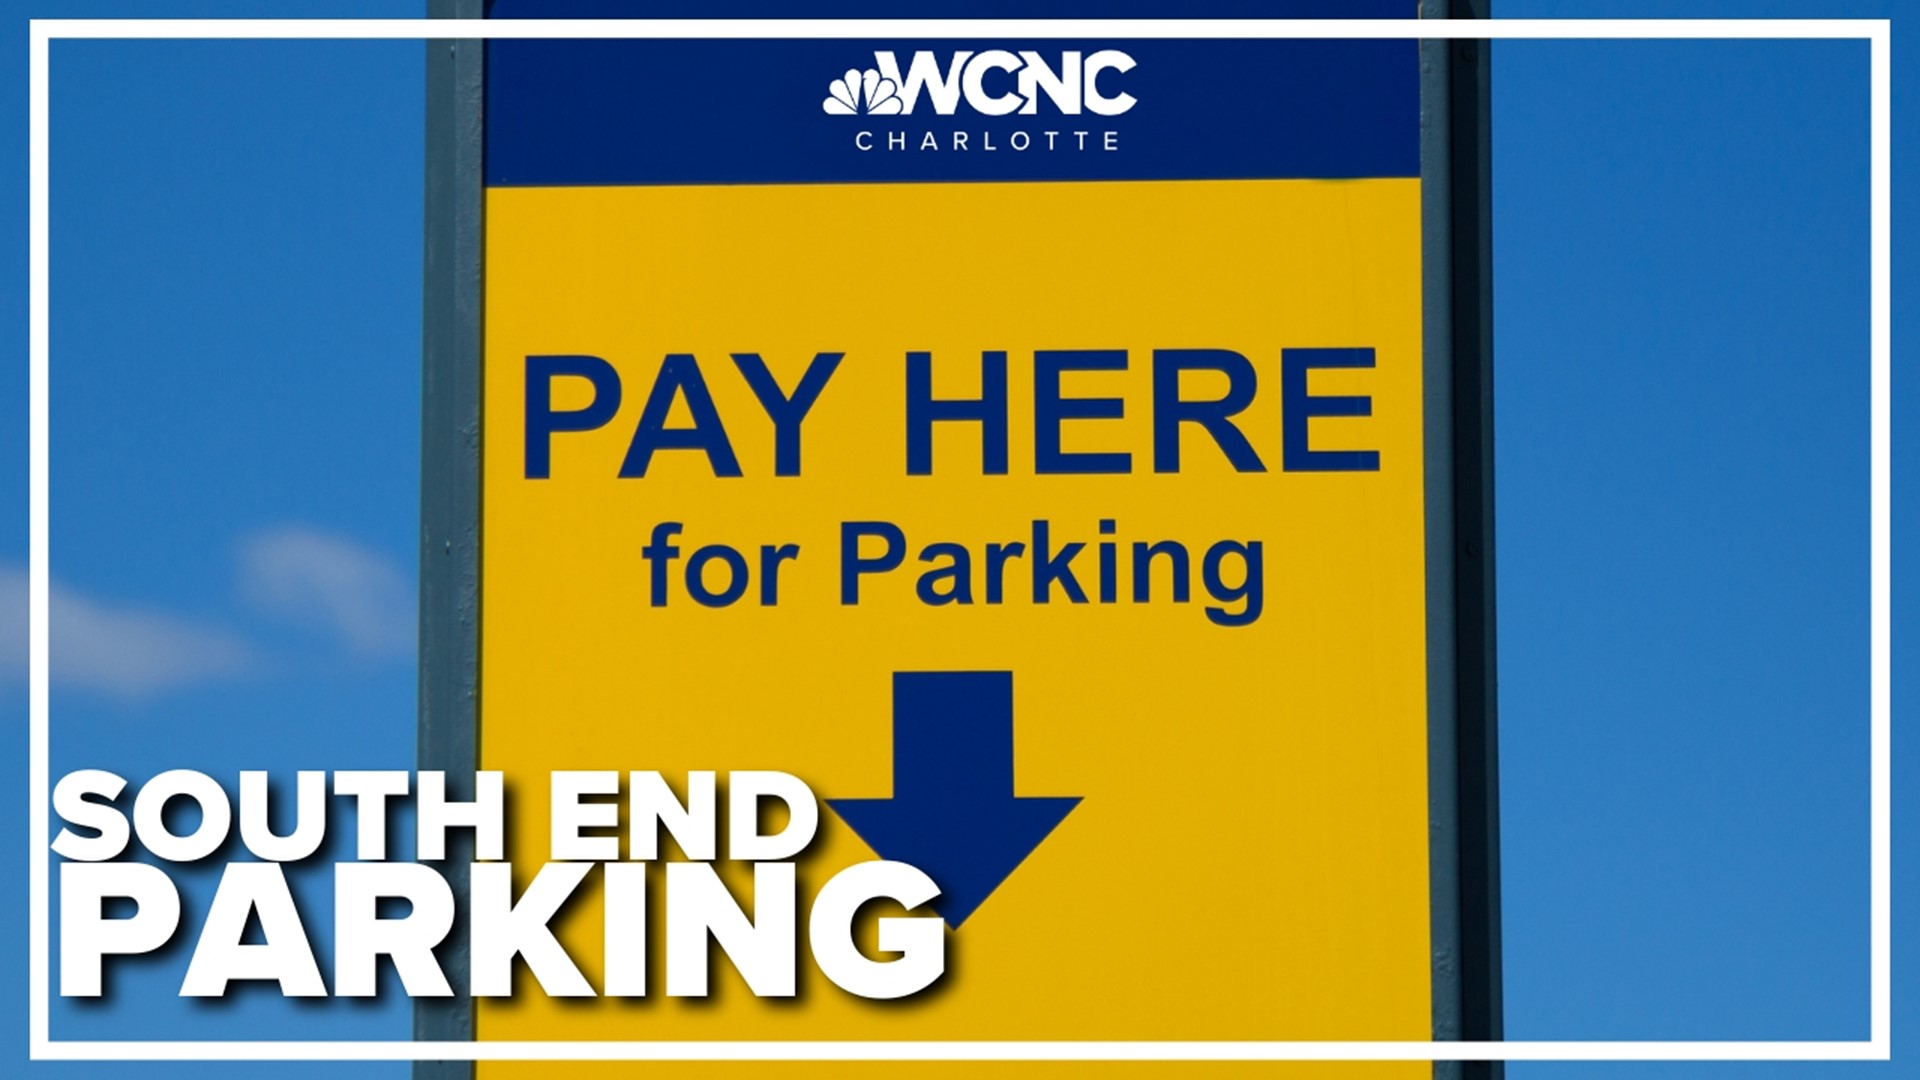 In a couple of weeks - you'll have to pay for street parking in South End on Saturdays.